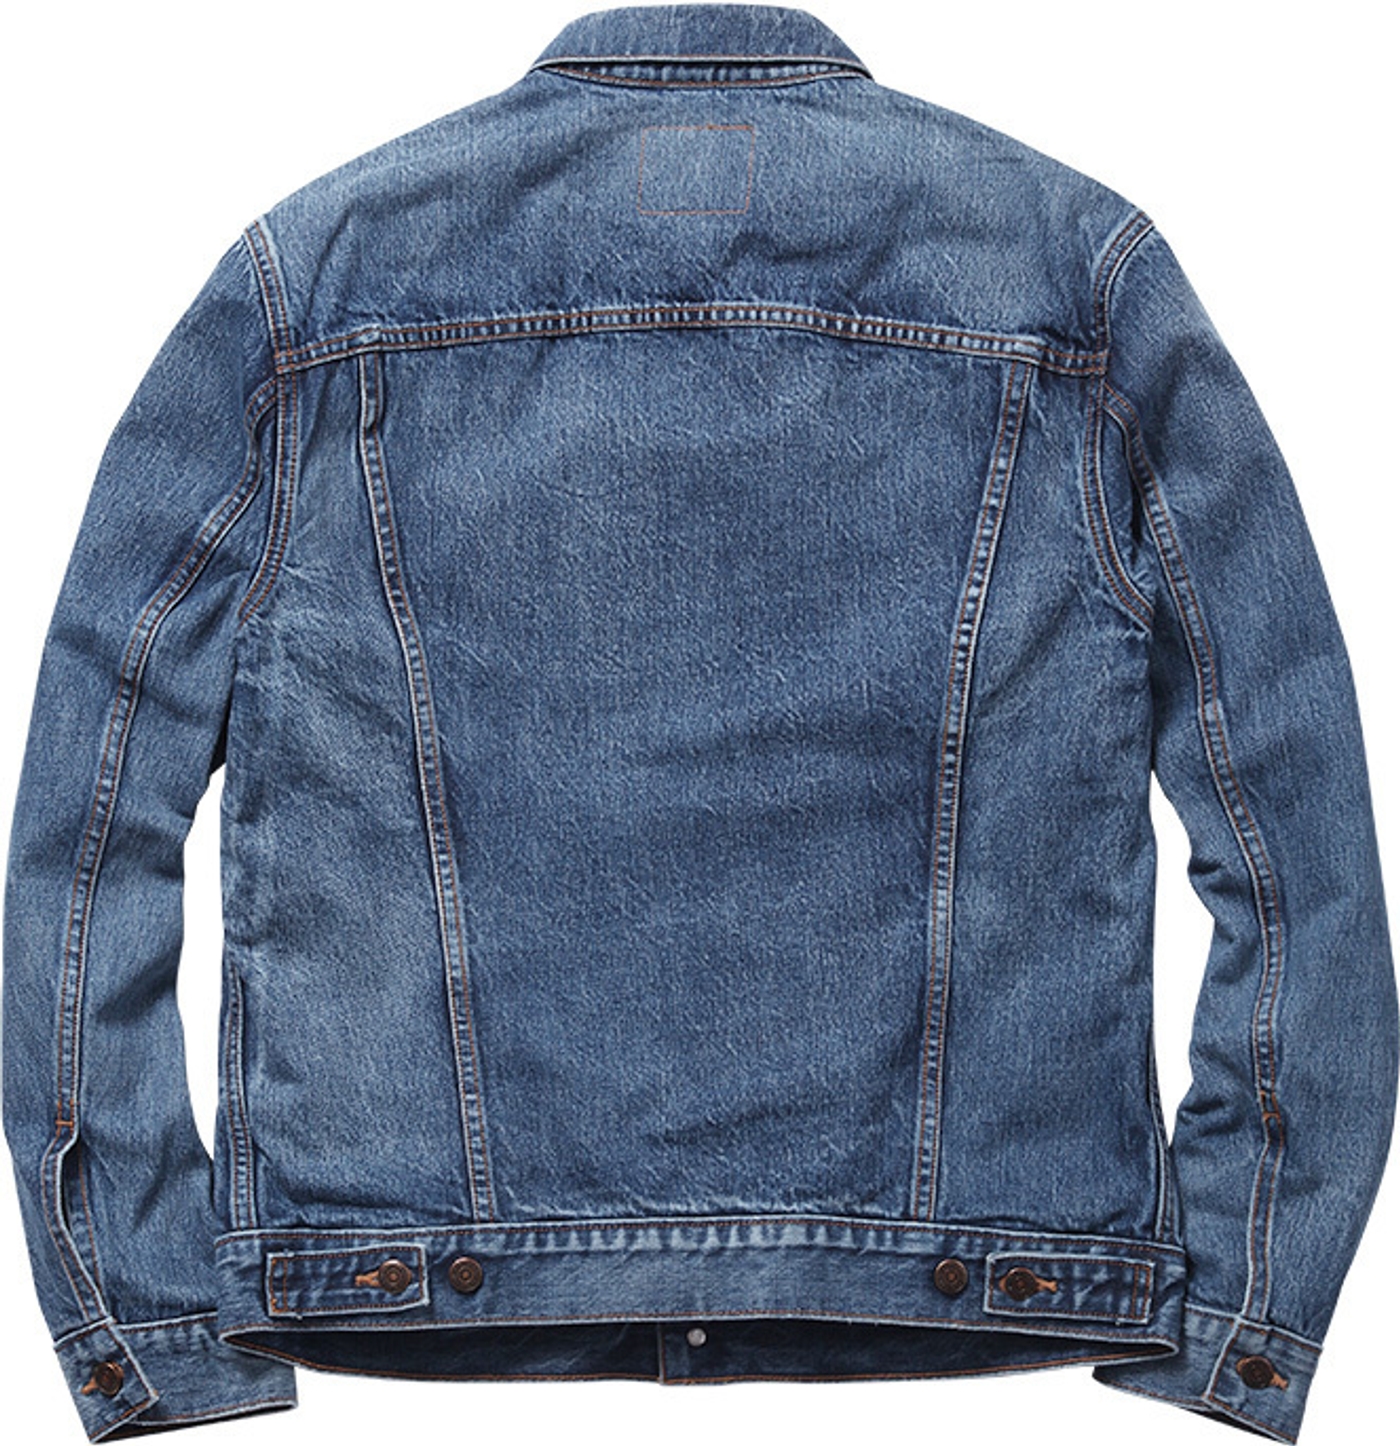 Custom fit Trucker Jacket 
Cotton 13 oz. selvedge denim with cotton twill lining.<br> Made In The U.S.A. (5/9)